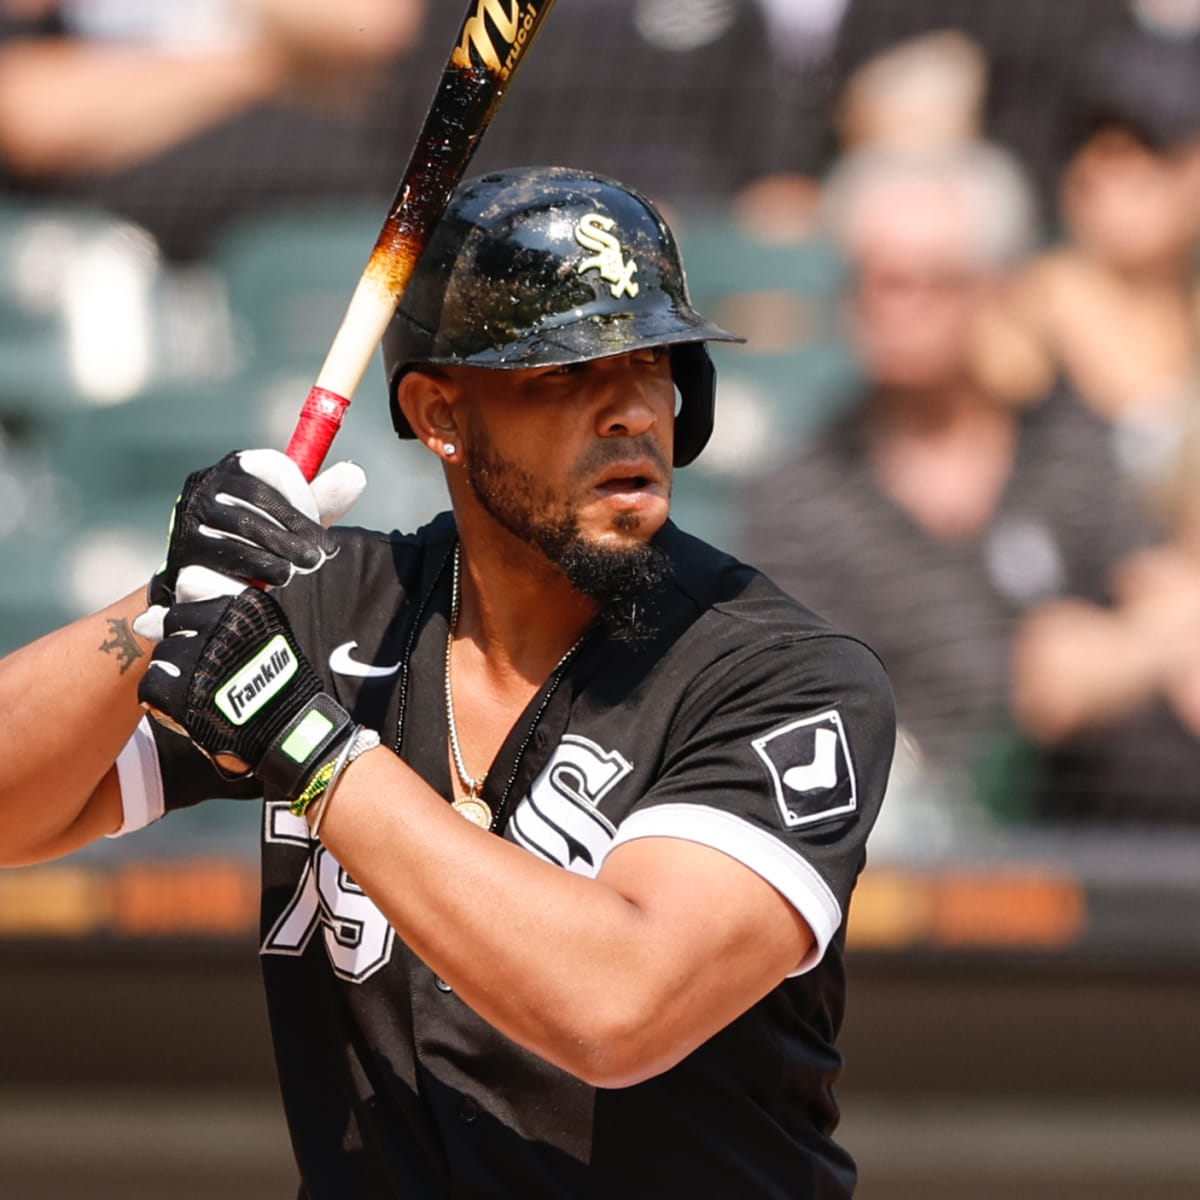 Jose Abreu is 'pumped' to join the Astros - Our Esquina